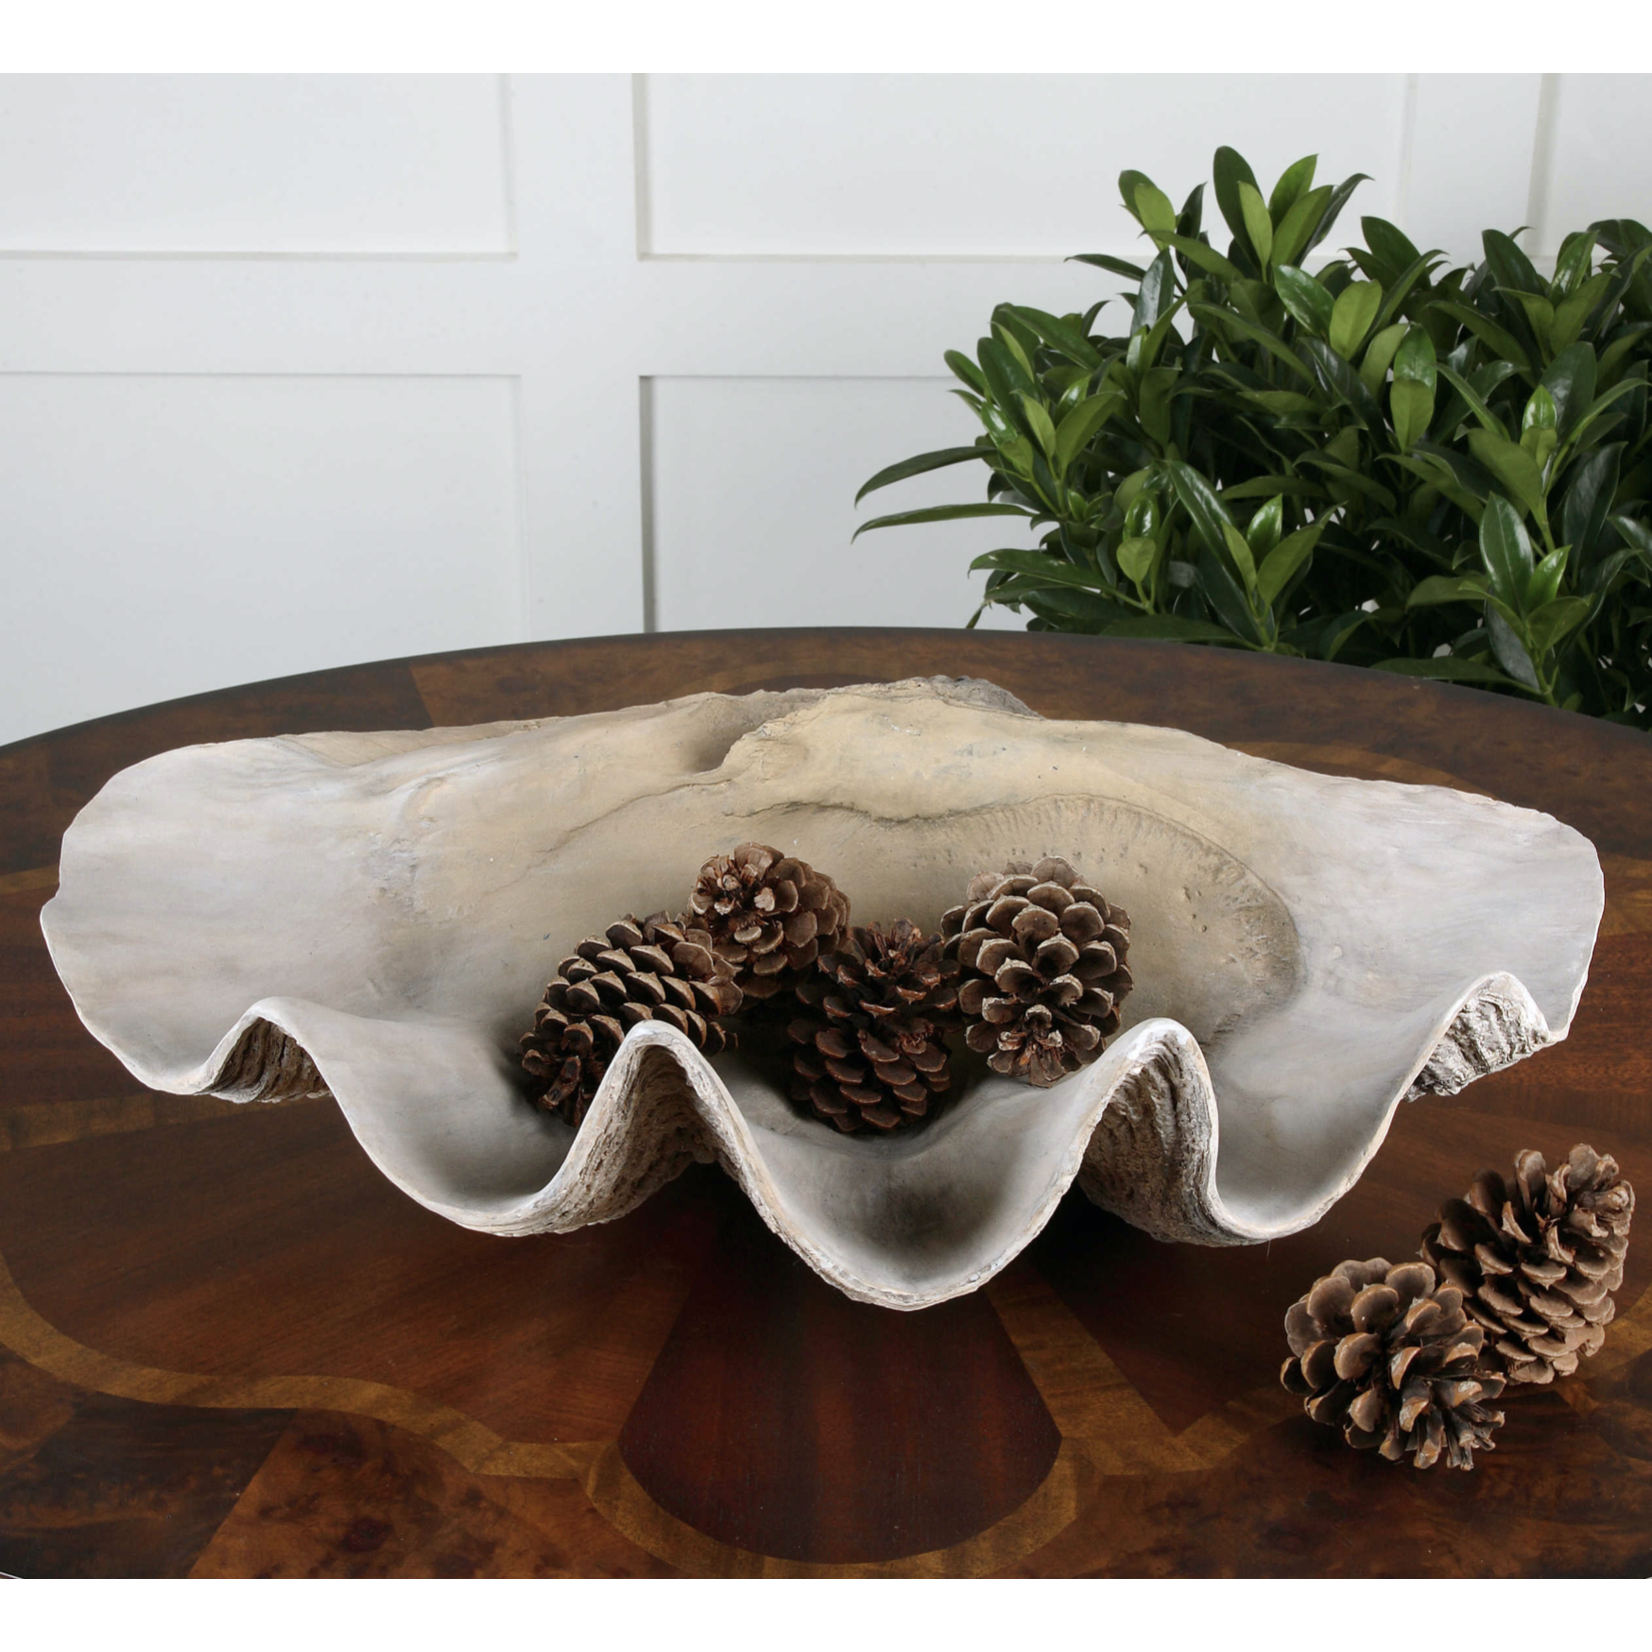 Outside The Box 23" Clam Shell Decorative Indoor Bowl